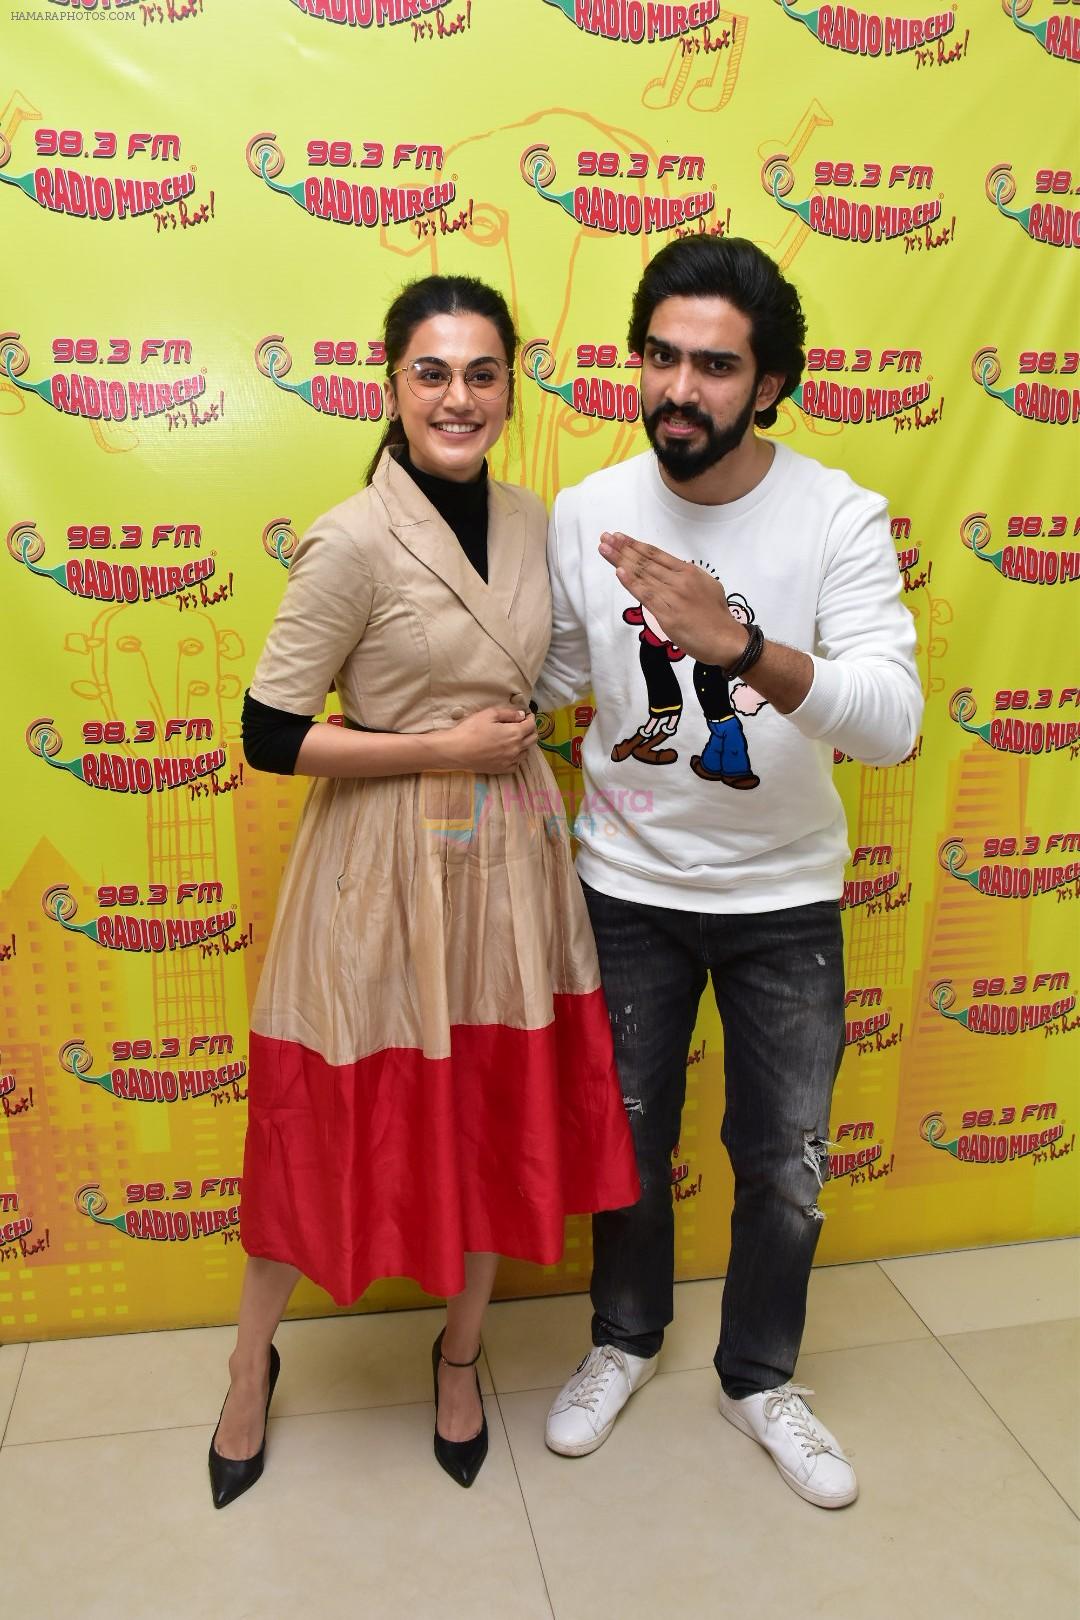 Taapsee Pannu, Singer Amaal Malik at the Song Launch Of Movie Badla on 20th Feb 2019